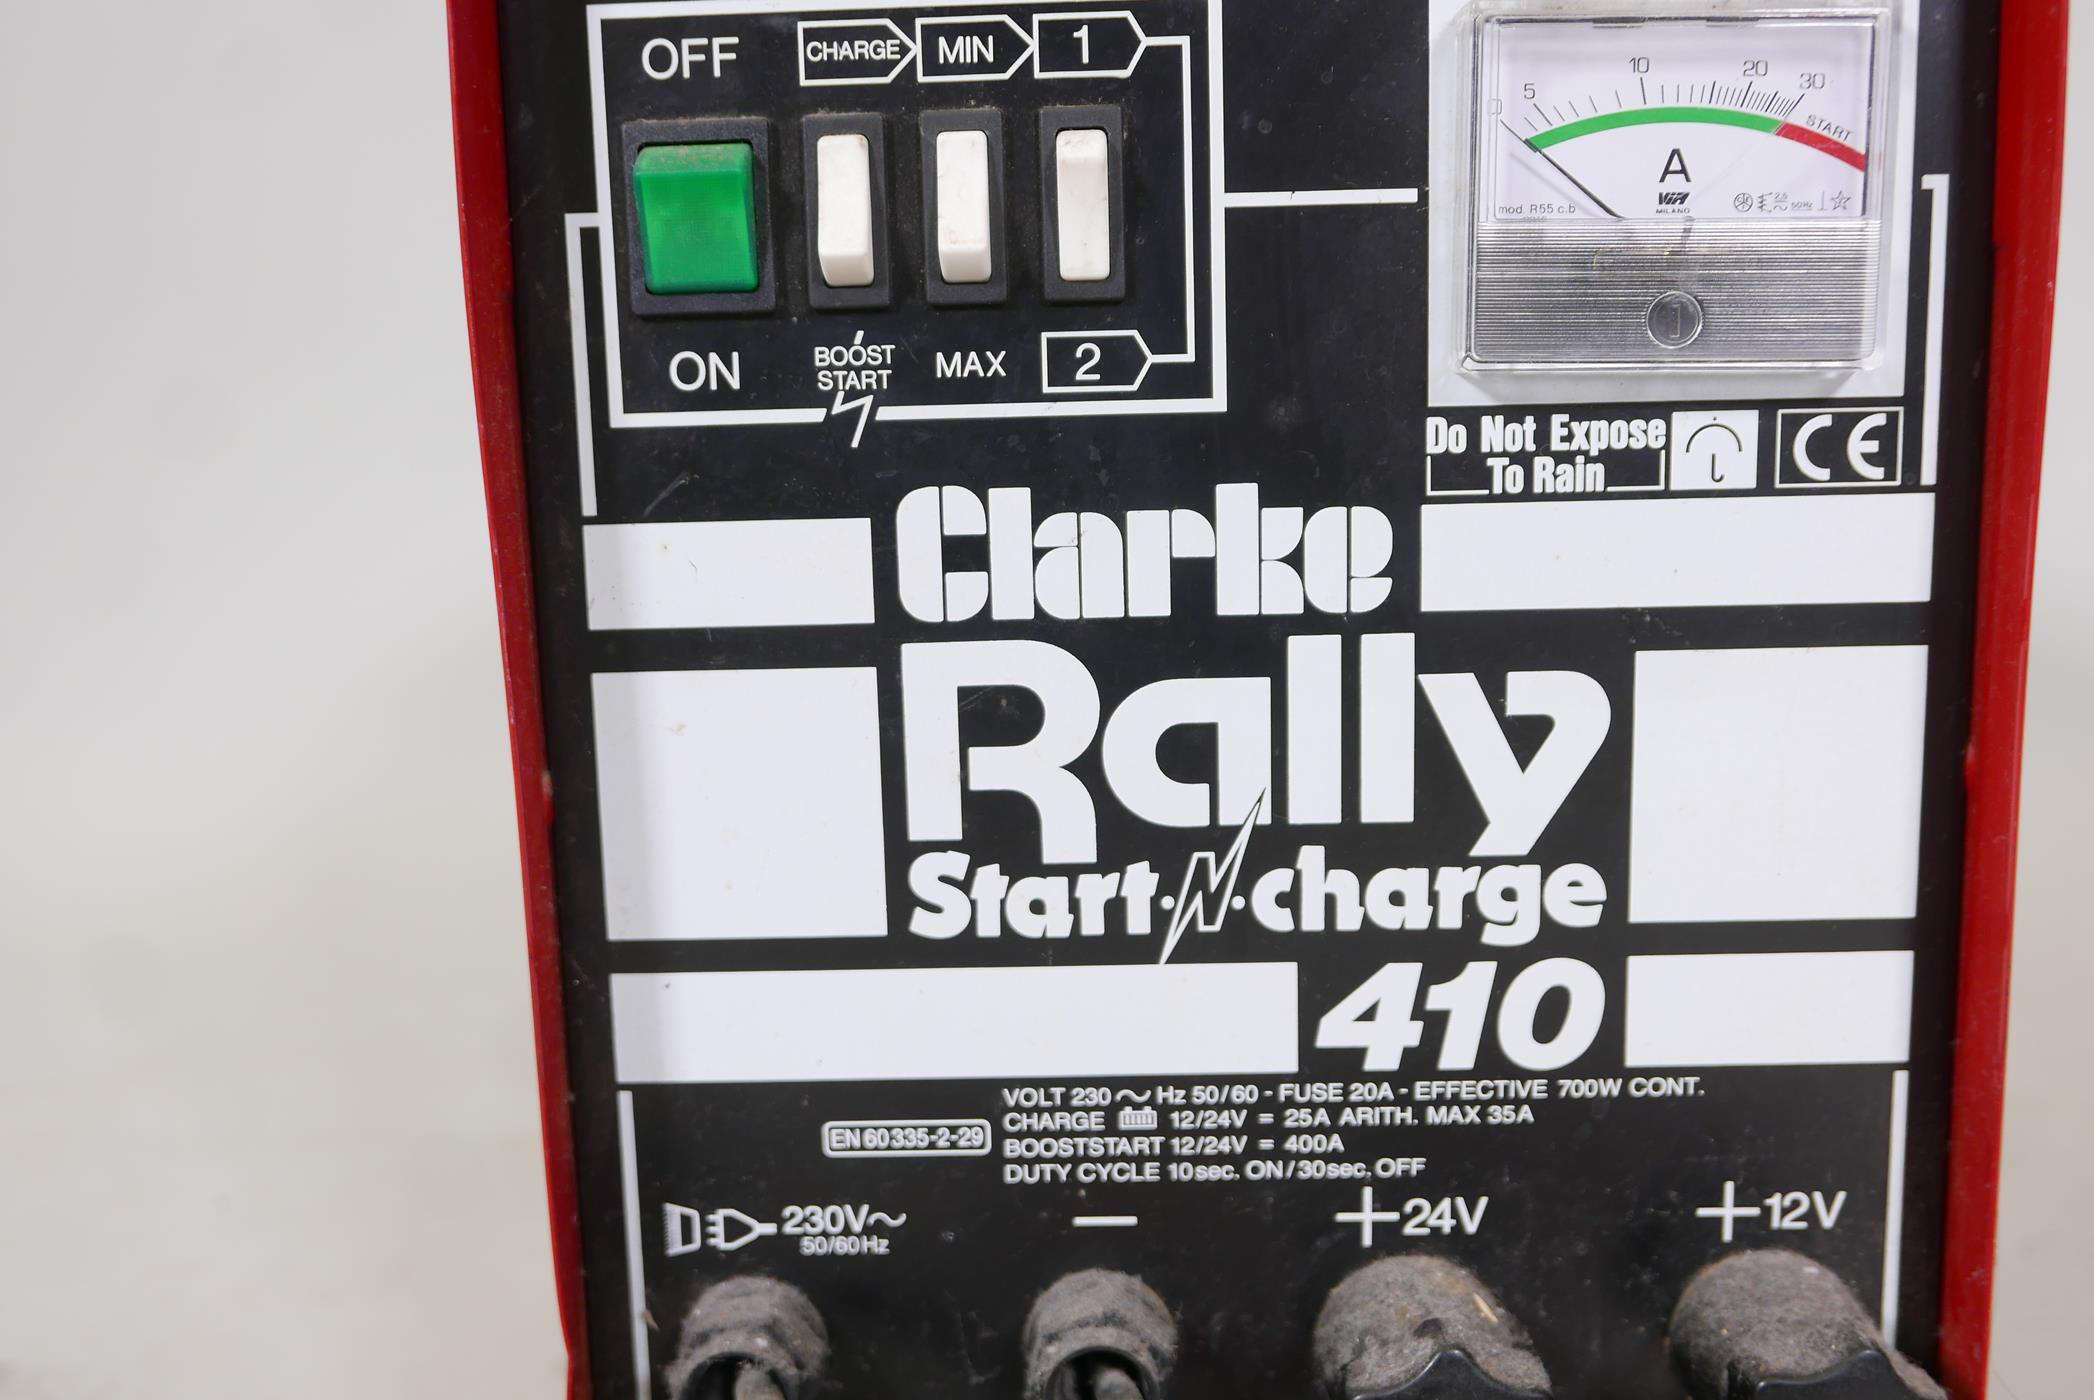 A clarke Rally smart/charge 410 battery charger/jump starter - Image 2 of 2